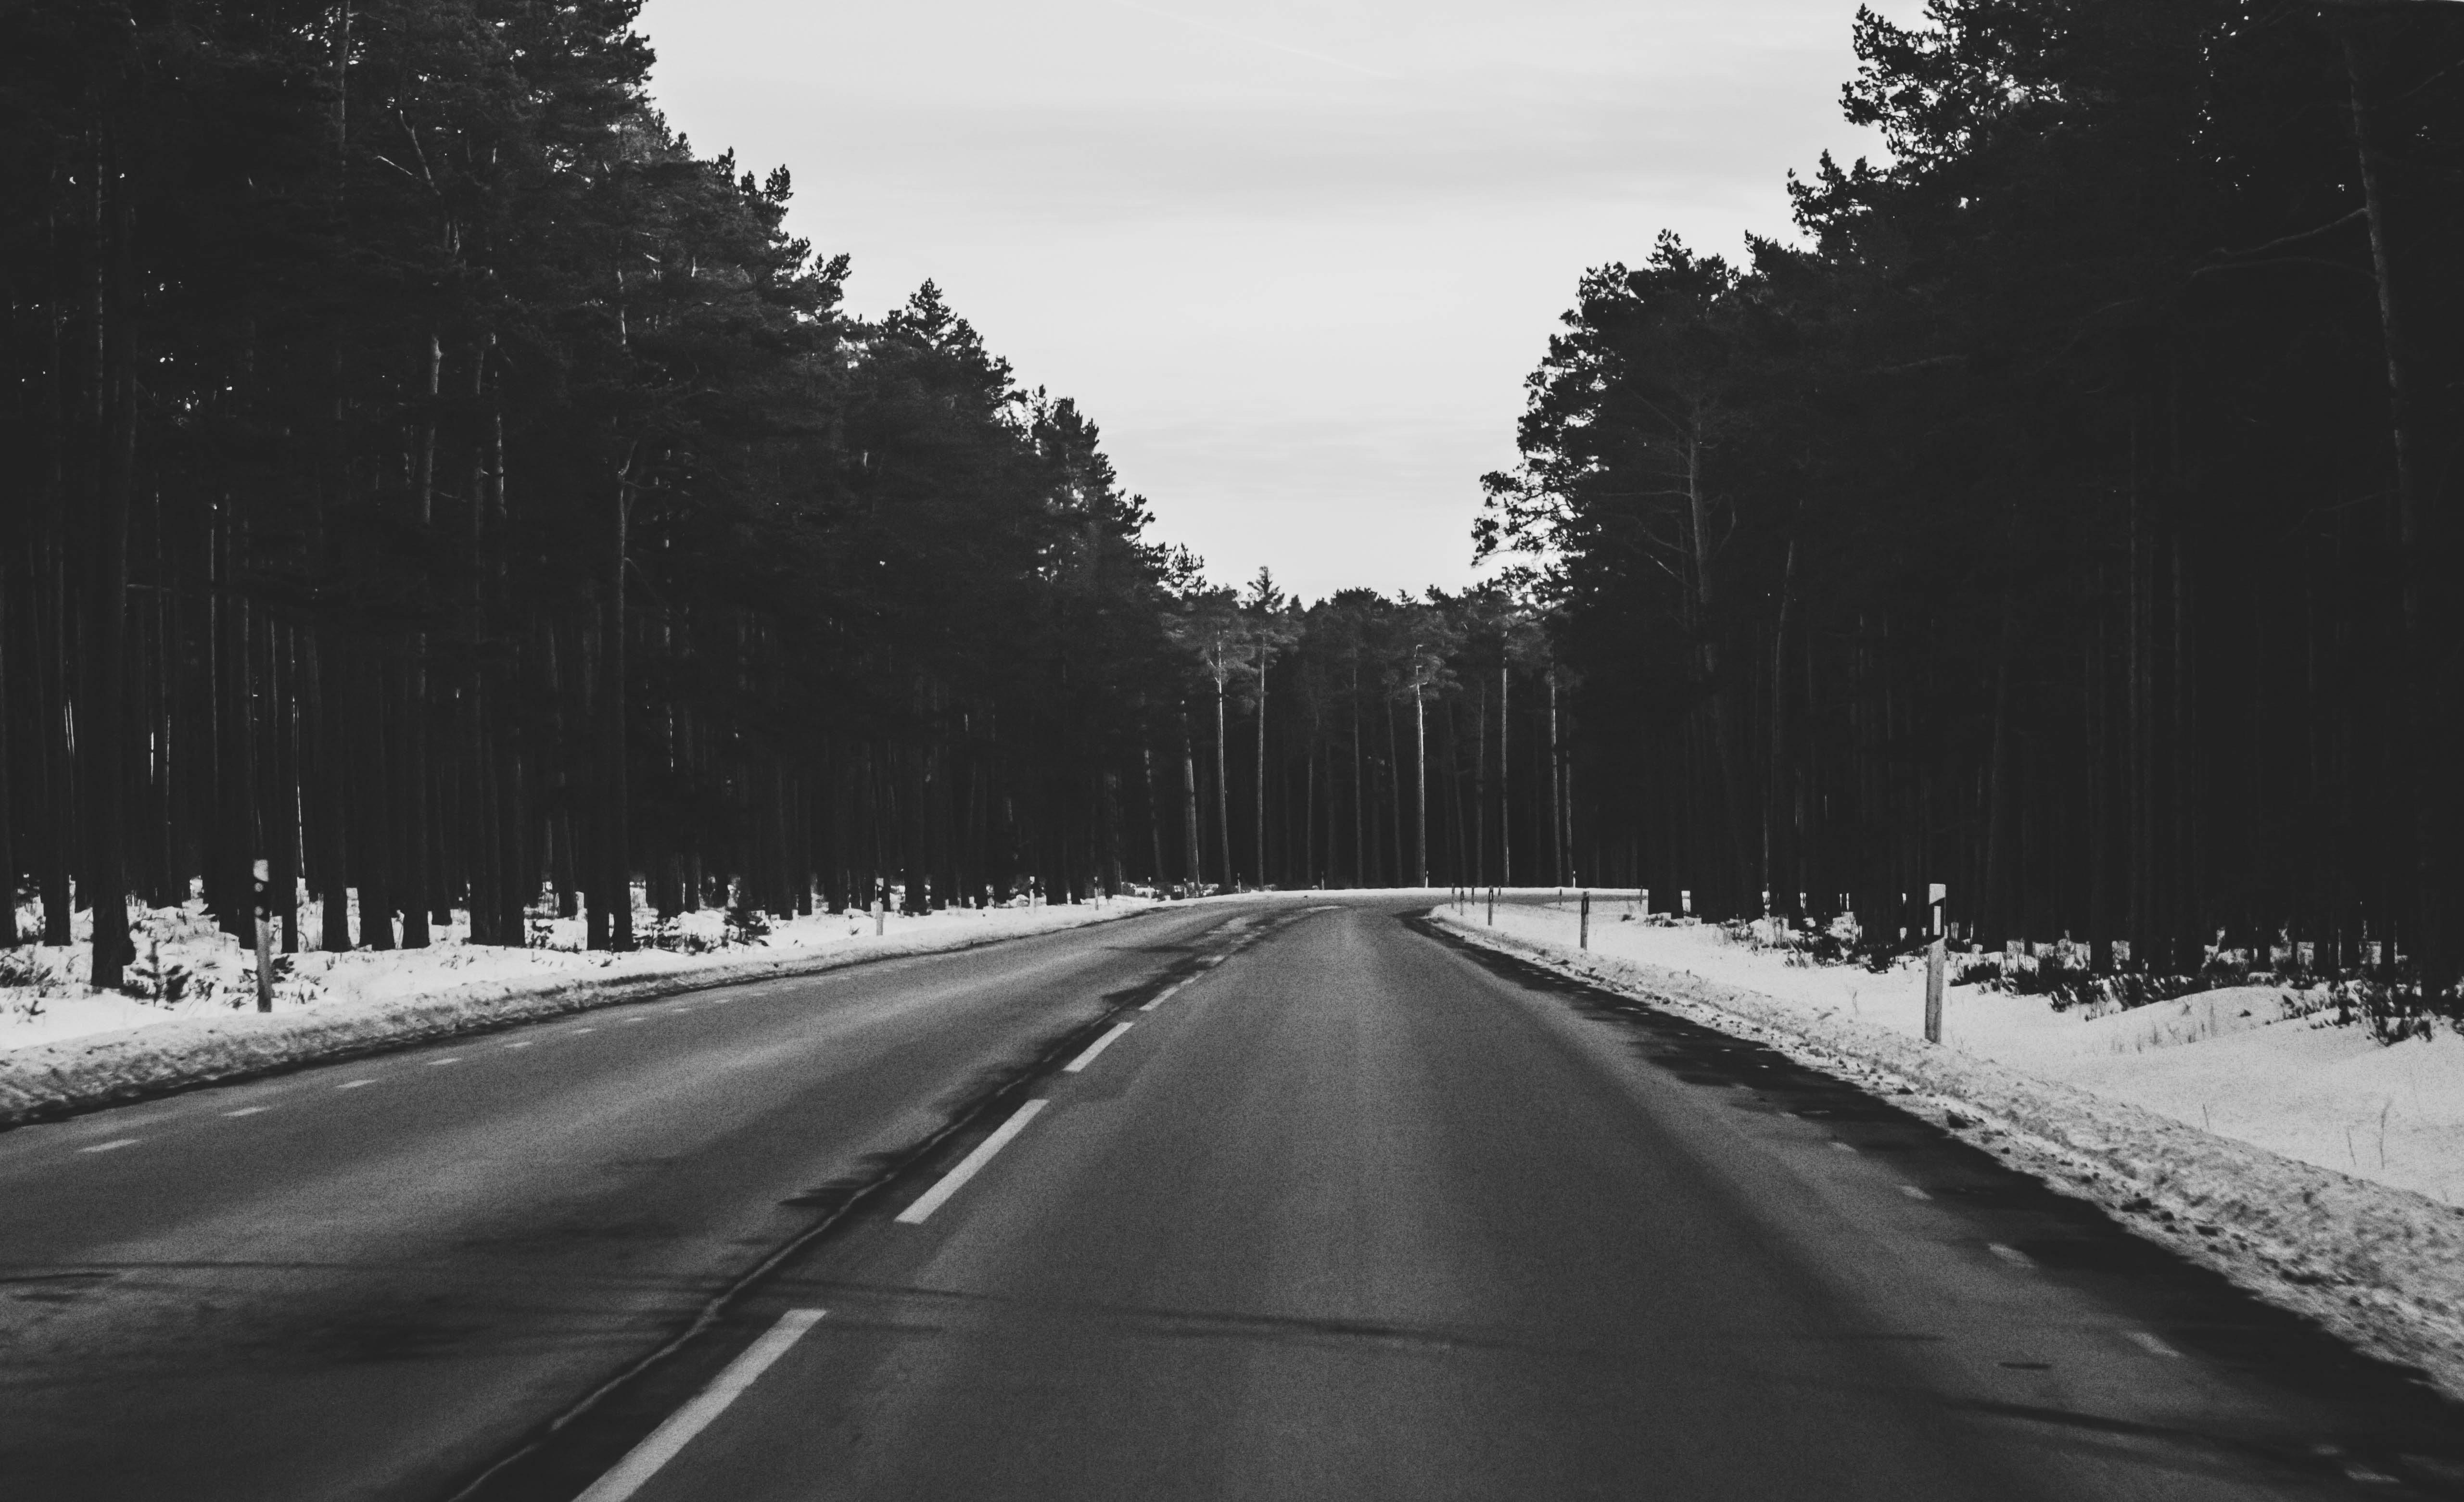 Monochrome Photography of Roadway During Winter, Asphalt, Roadway, Winter, Trees, HQ Photo